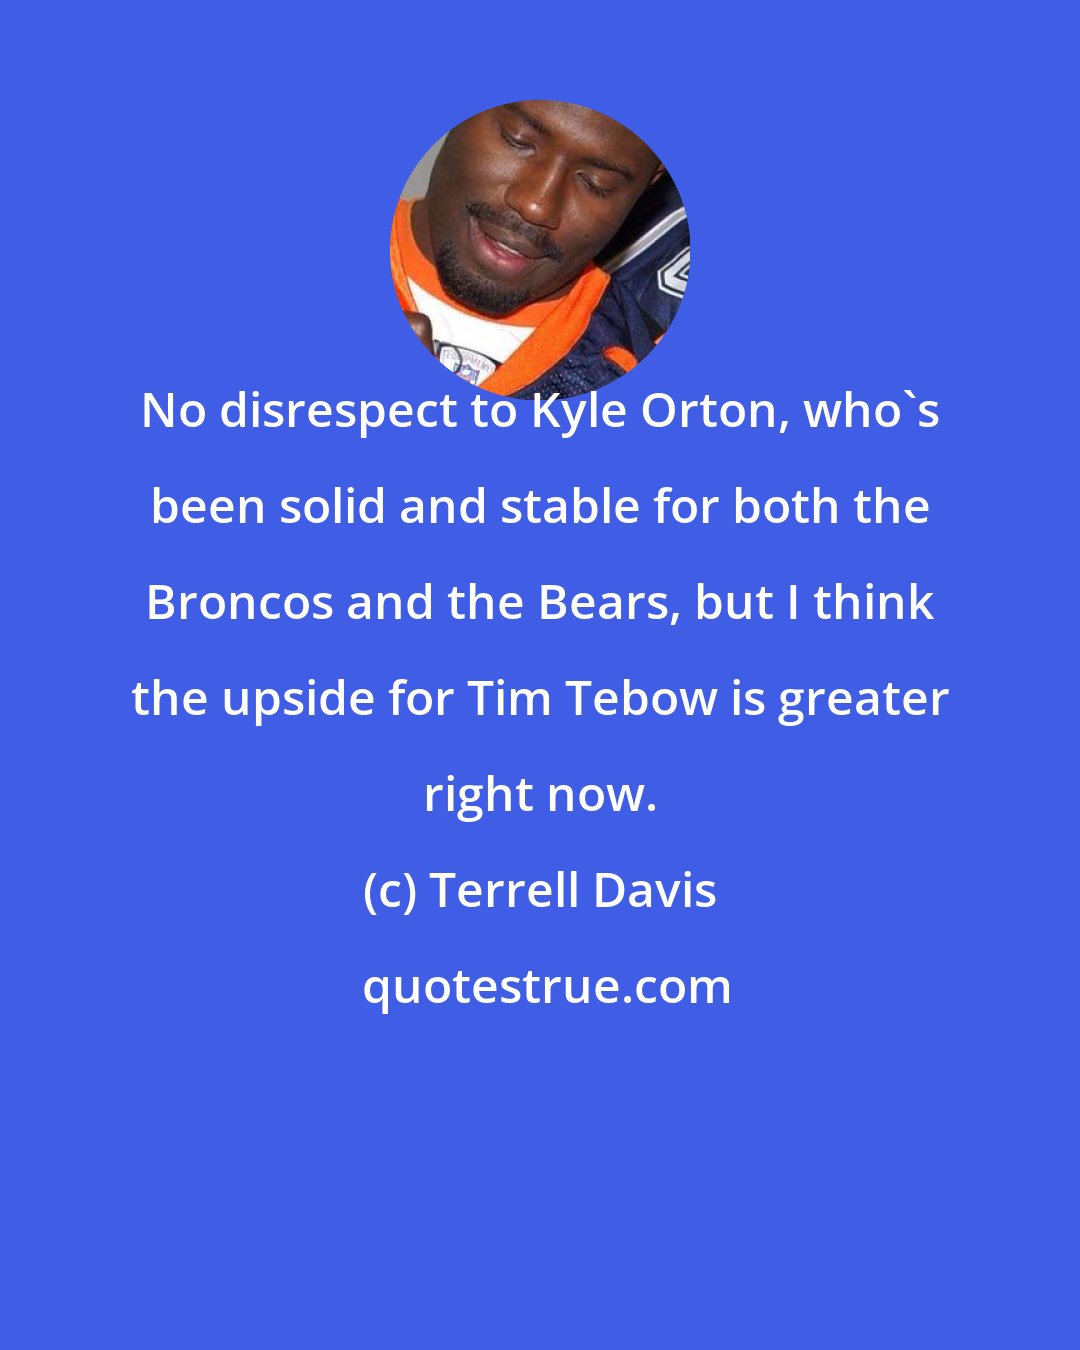 Terrell Davis: No disrespect to Kyle Orton, who's been solid and stable for both the Broncos and the Bears, but I think the upside for Tim Tebow is greater right now.